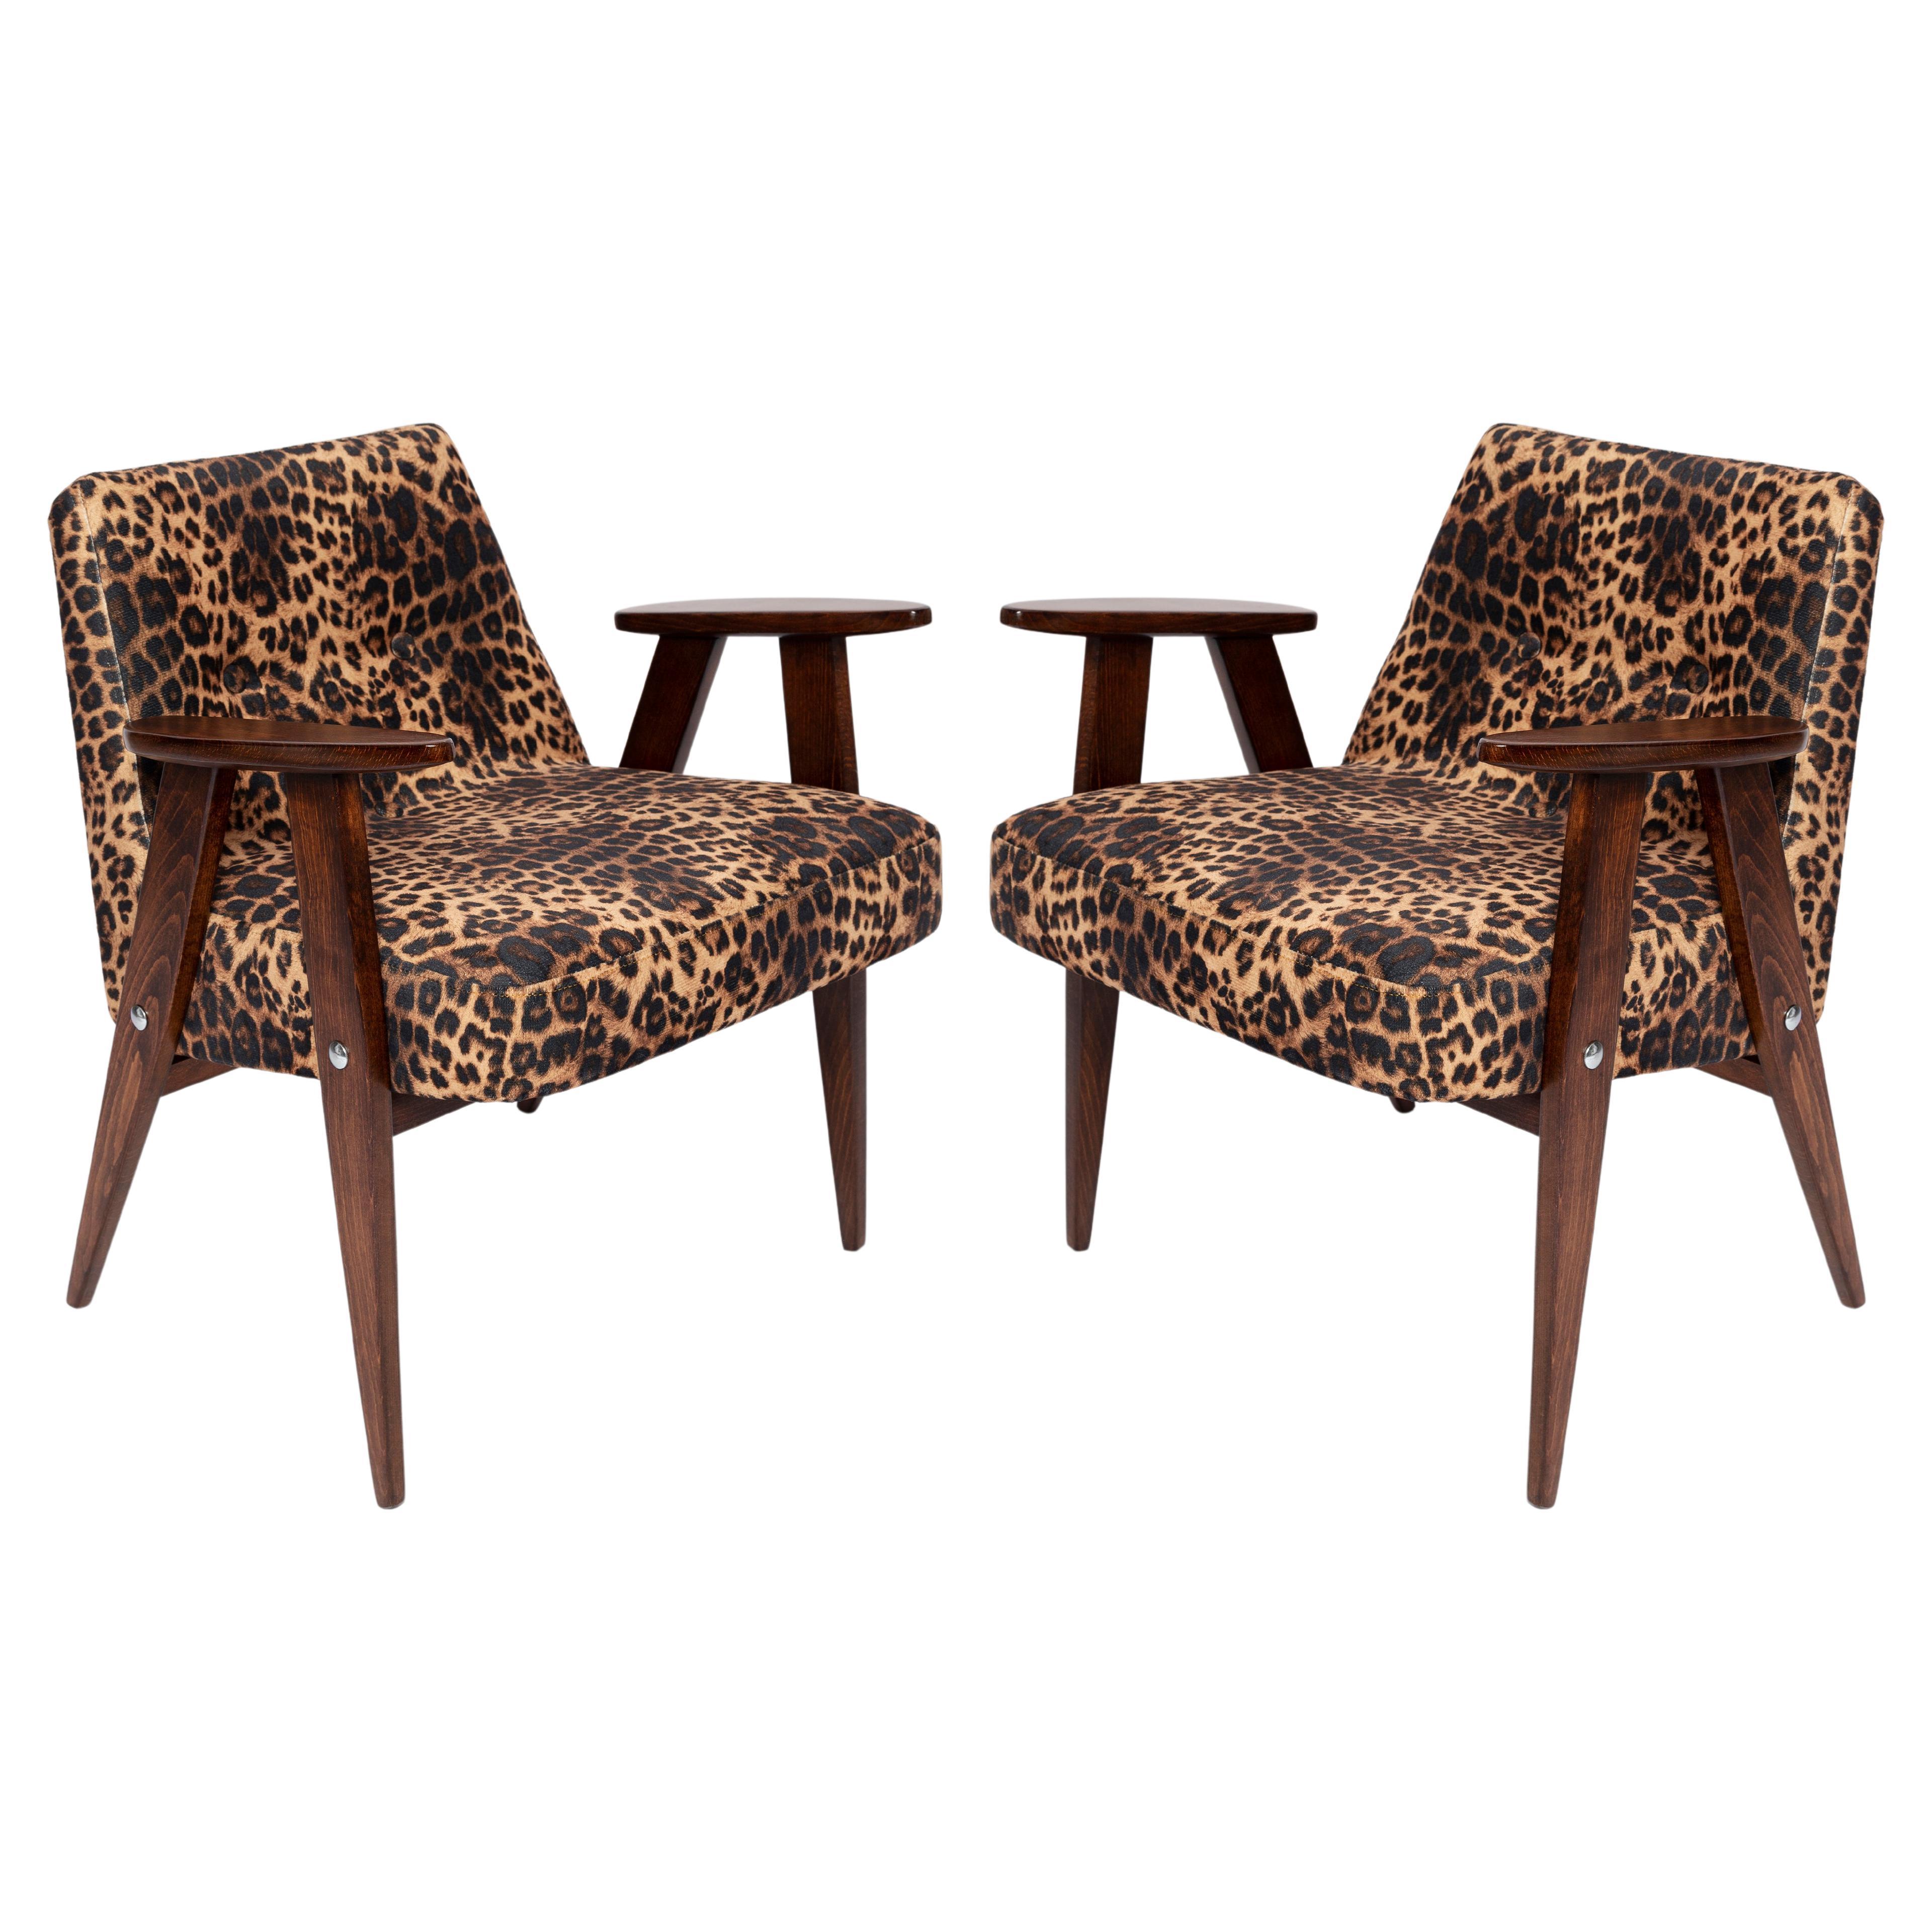 Two Midcentury 366 Armchairs in Leopard Print Velvet, Jozef Chierowski, 1960s For Sale